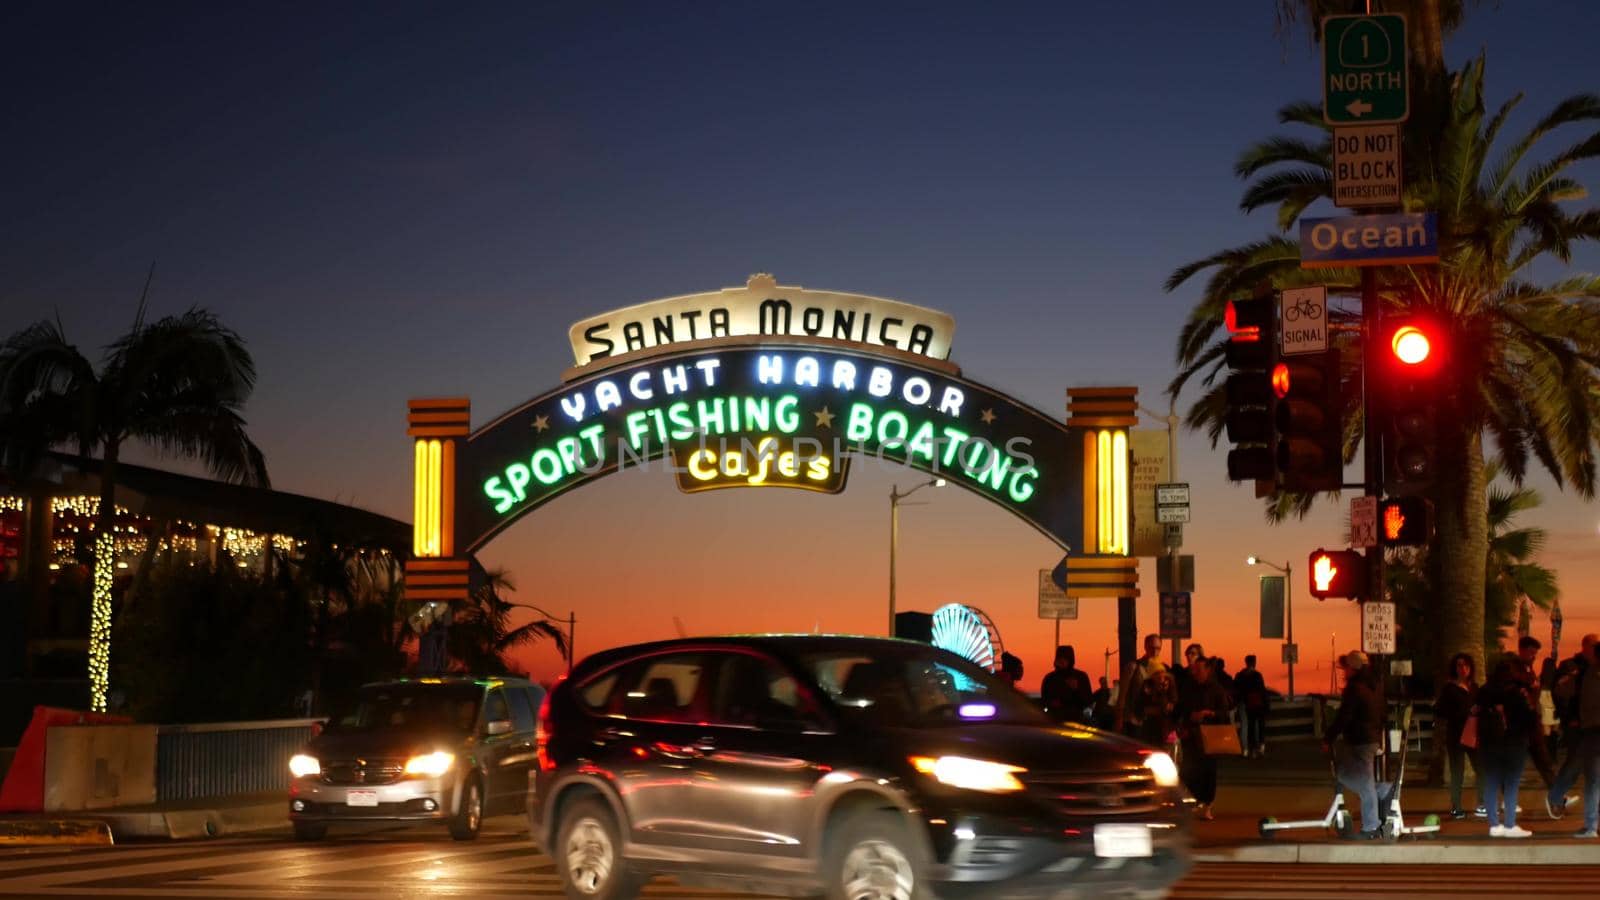 SANTA MONICA, LOS ANGELES CA USA - 19 DEC 2019: Summertime iconic vintage symbol. Classic illuminated retro sign on pier. California summertime aesthetic. Glowing lettering on old-fashioned signboard.